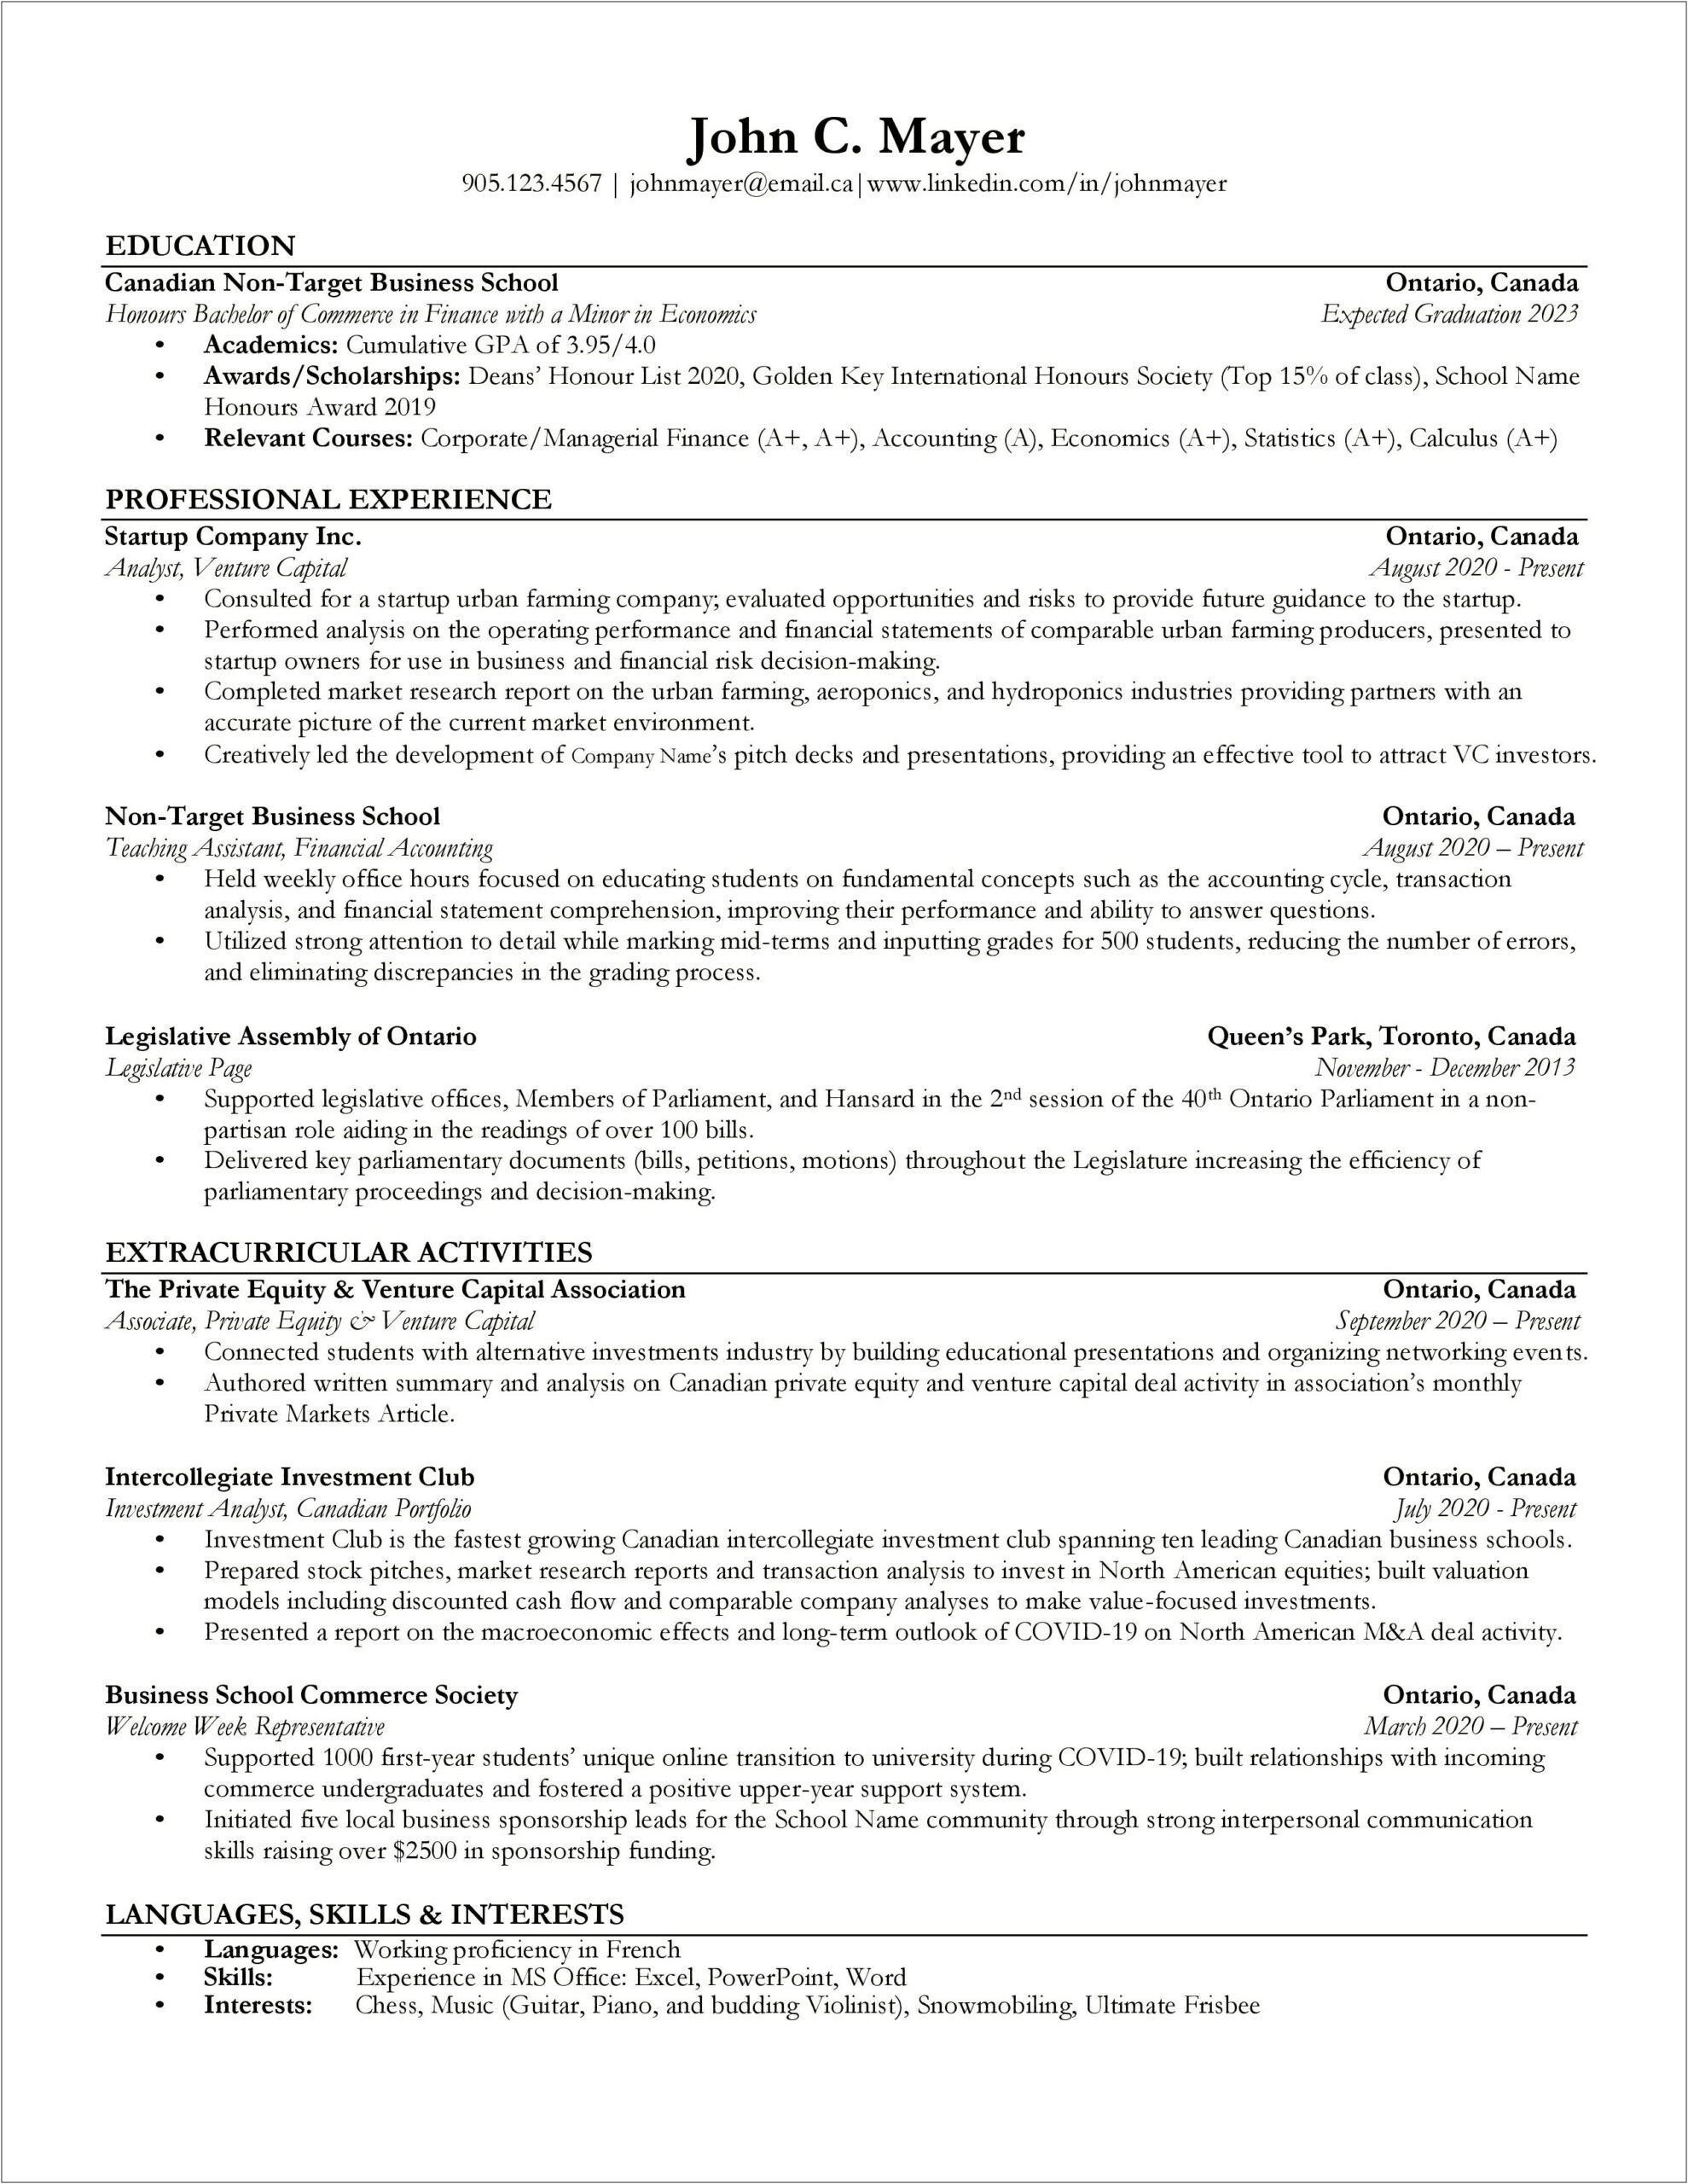 Personal Email And School Email On Resume